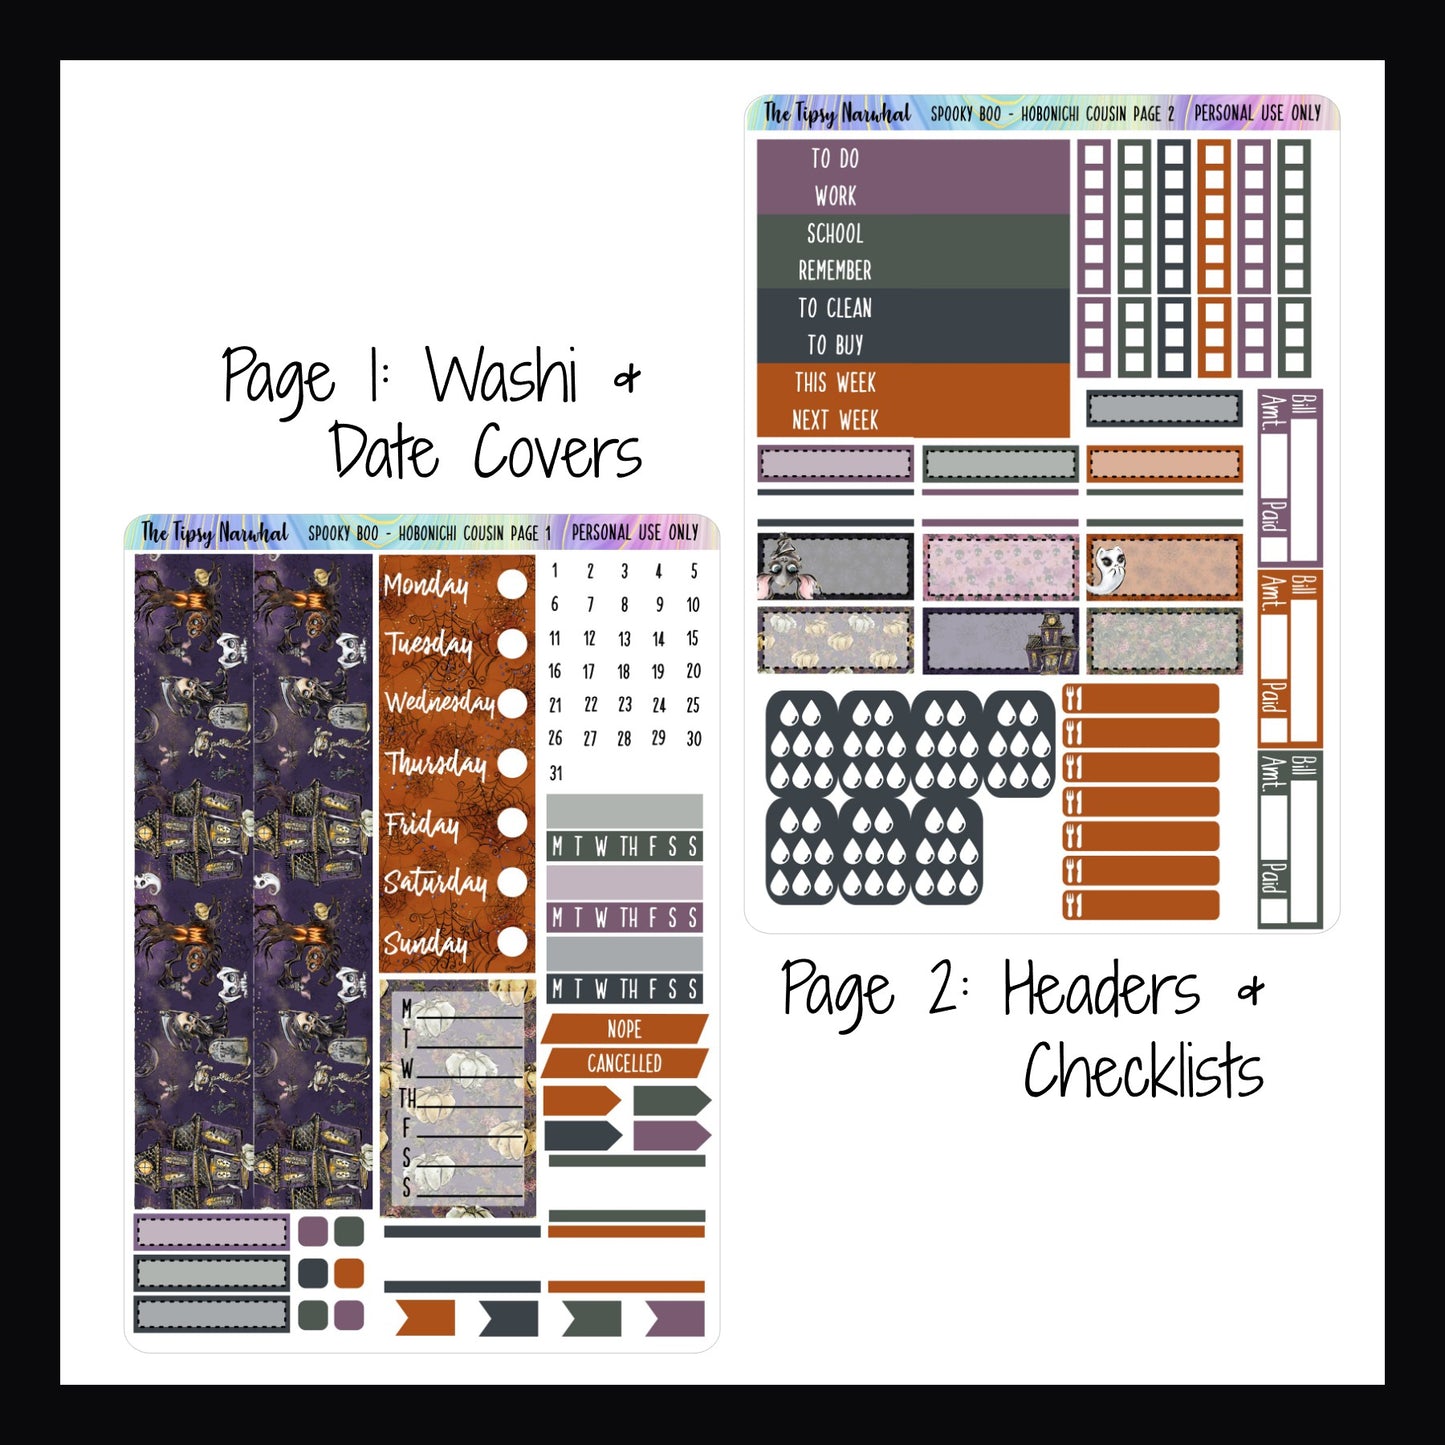 Spooky Boo Hobonichi Kit Pages 1 and 2, Spooky characters, halloween themed, sticker sheets washi stickers, date covers, weekly sticker, habit trackers, flag stickers, water tracker, meal tracker, checklists and header stickers